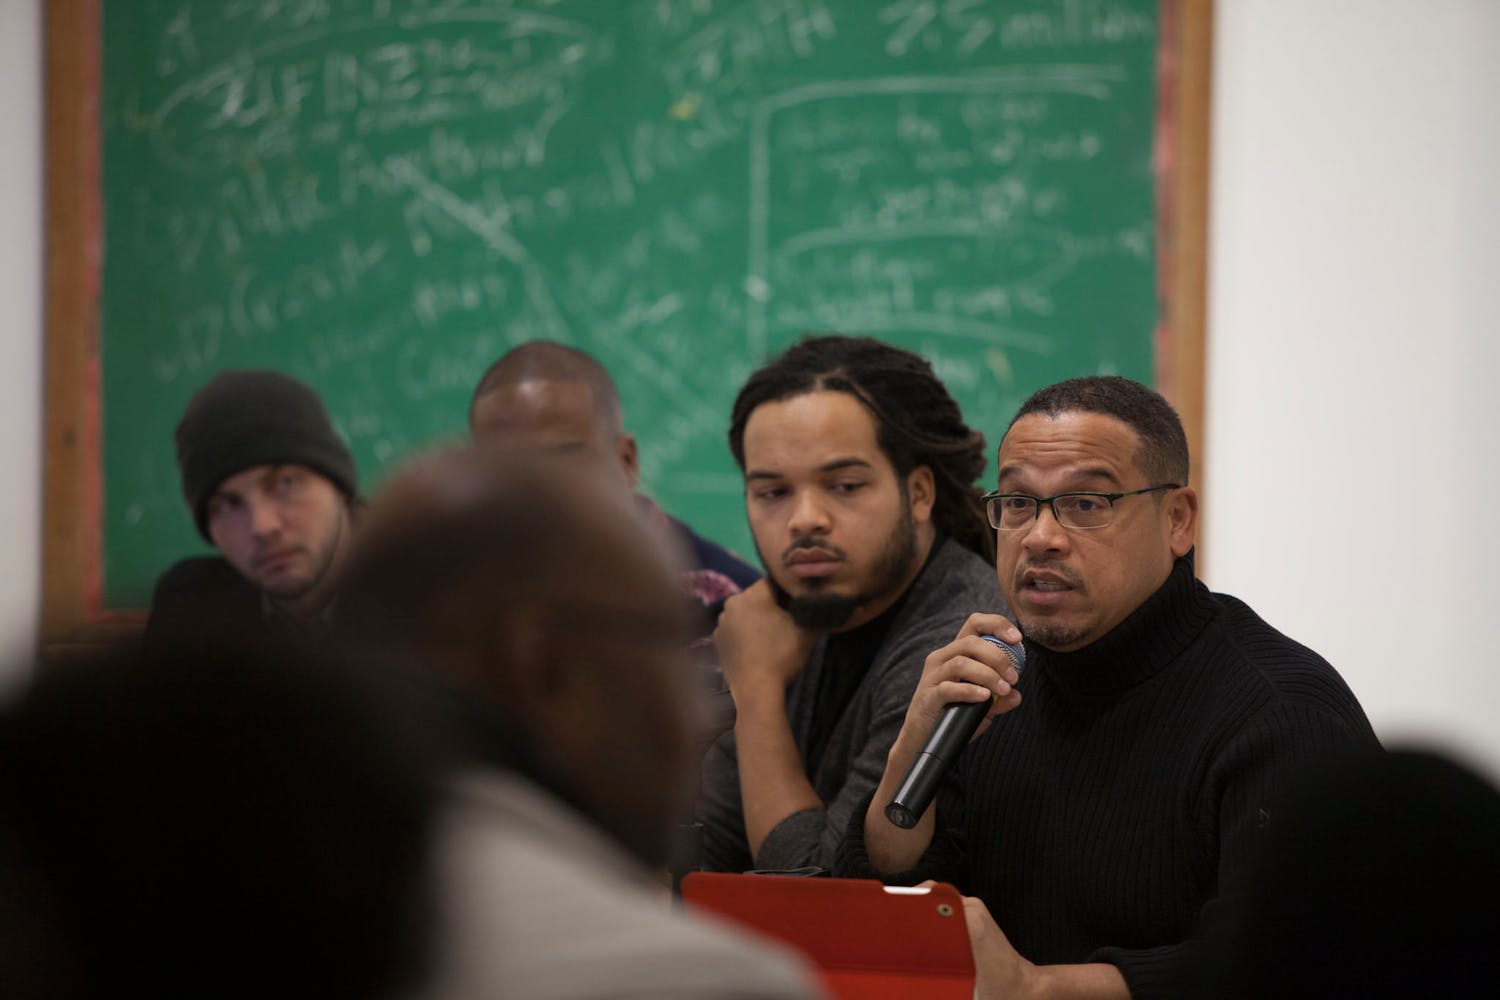 Holding Court: Congressman Keith Ellison, 2014; part of the exhibition Radical Presence: Black Performance in Contemporary Art, 2014